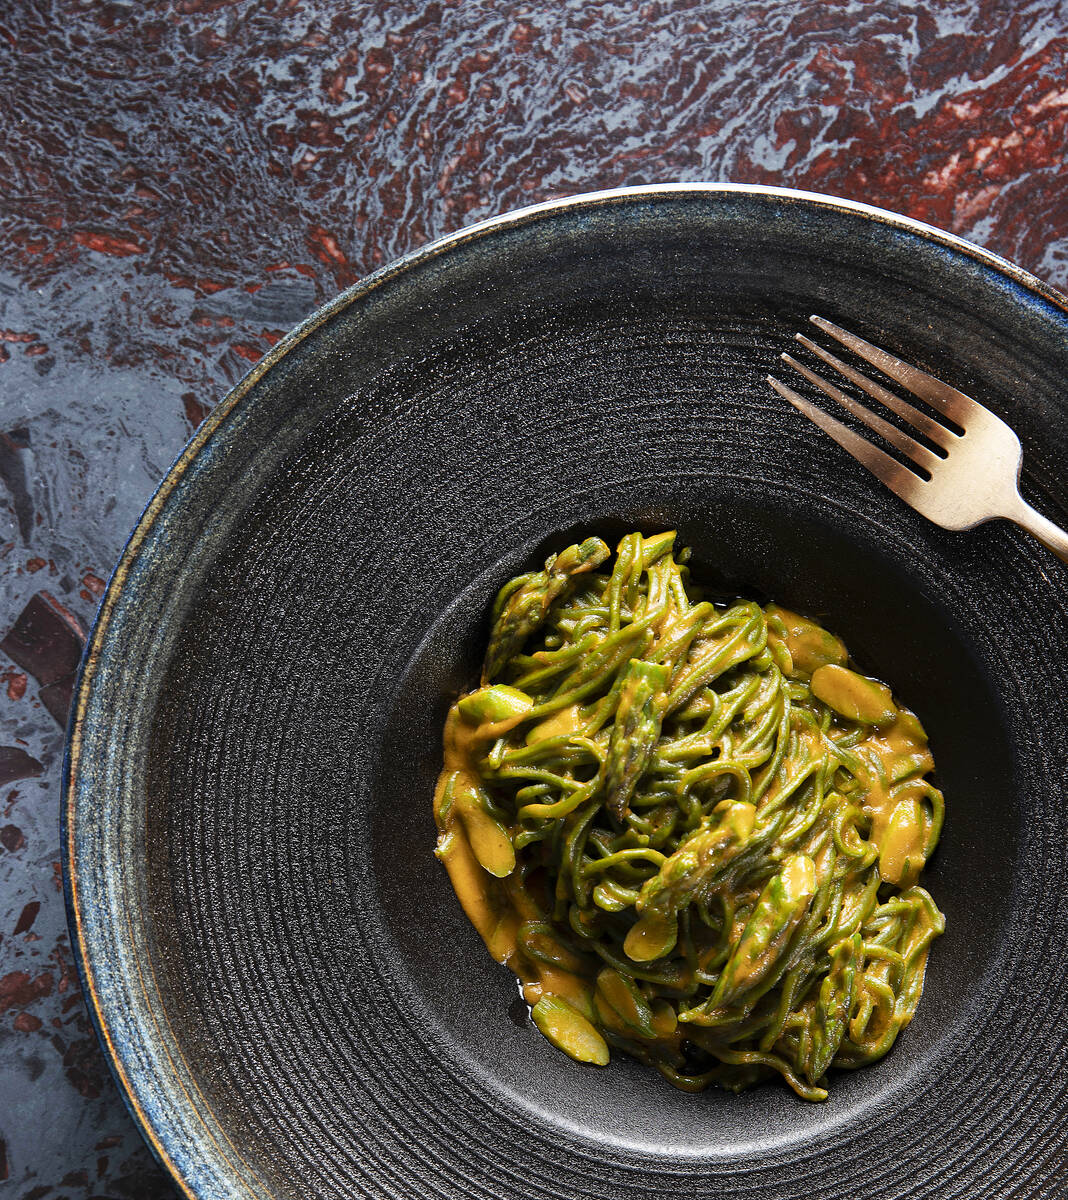 Spinach tagliarini tossed with Calabrian-style pesto sauce at Anima by Edo on Tuesday, May 3, 2 ...